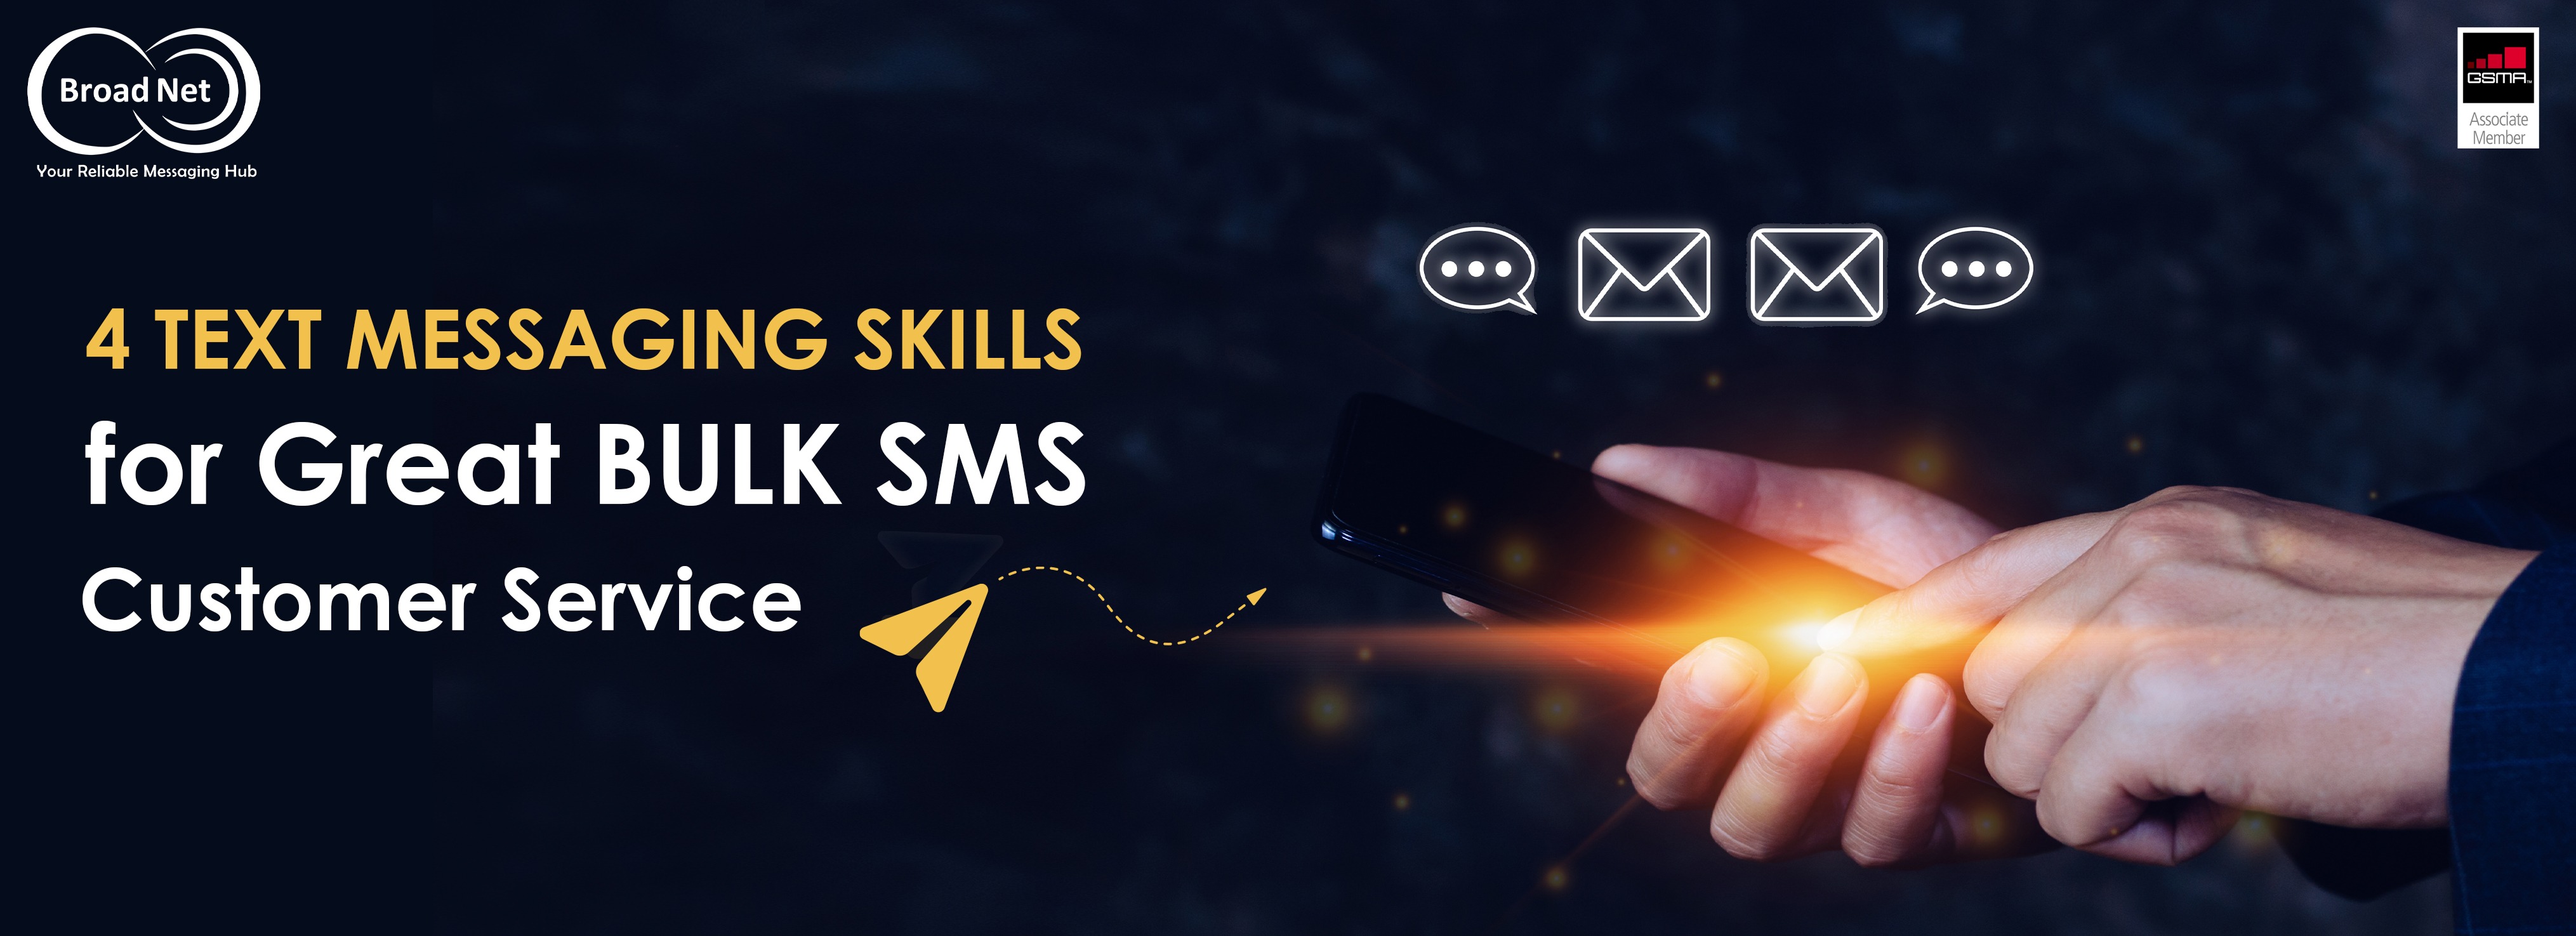 4 text messaging skills for Great bulk SMS Customer Service